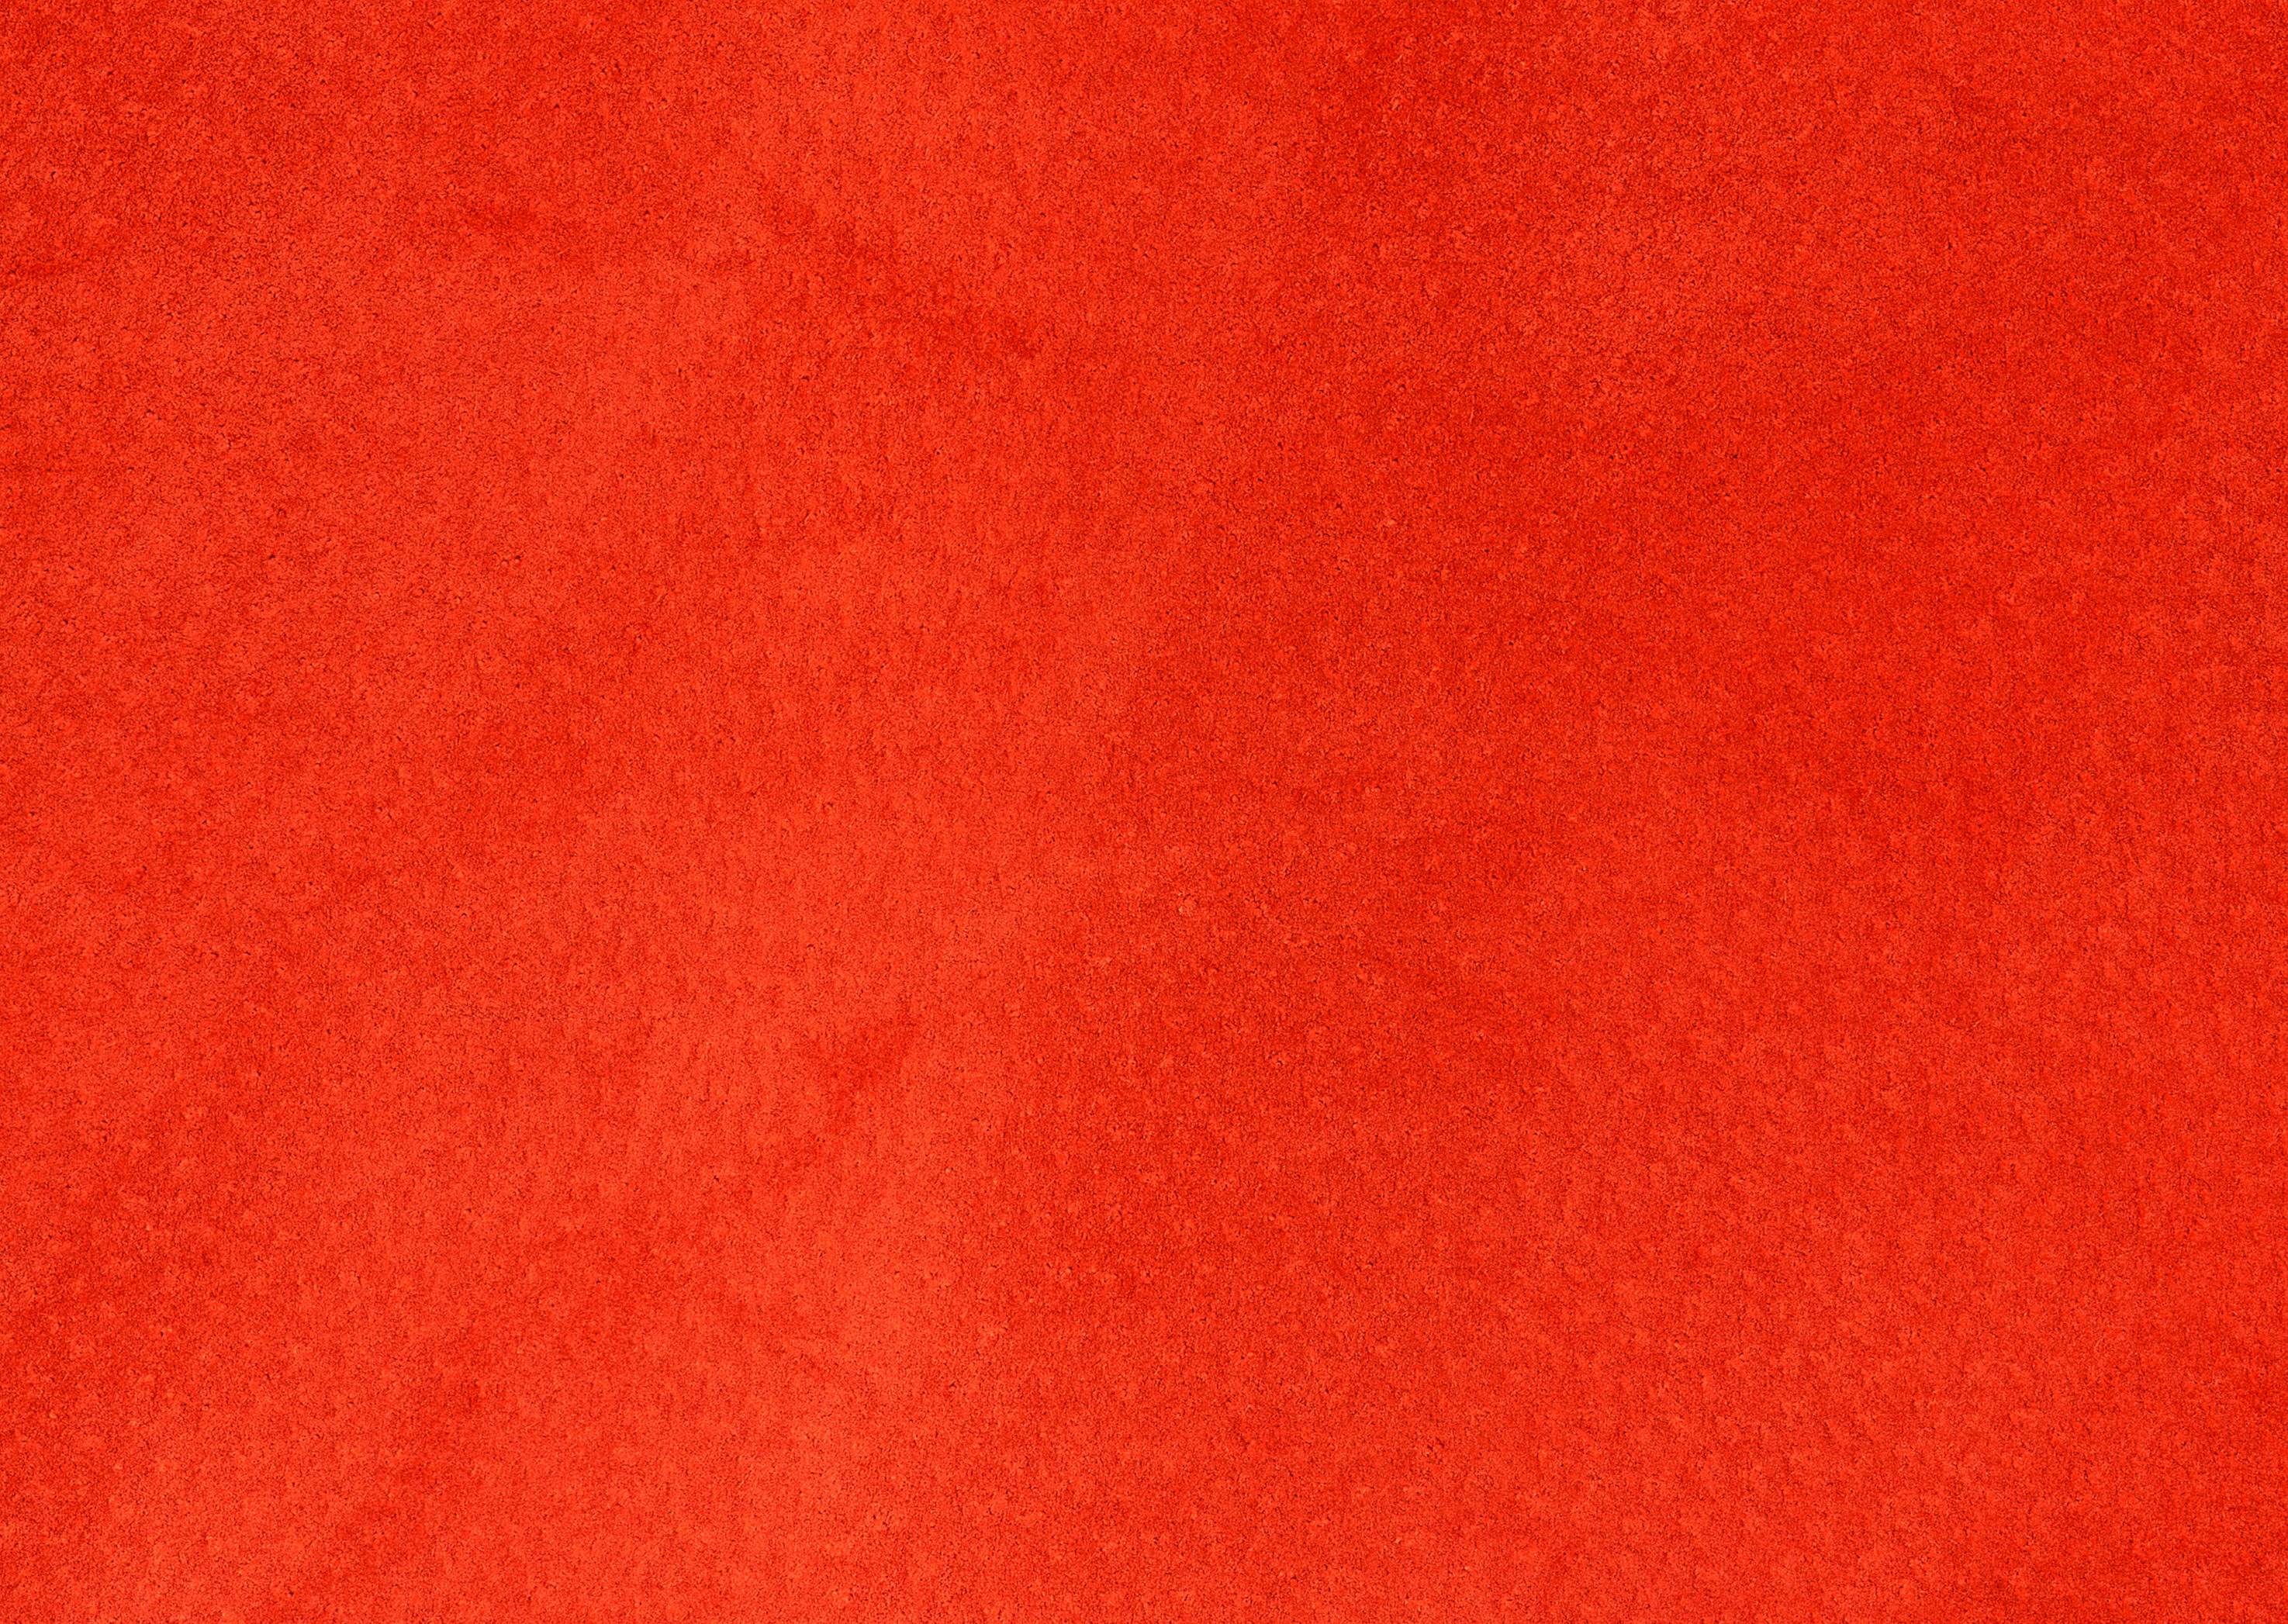 Orange leather big textures background image, free picture leather download